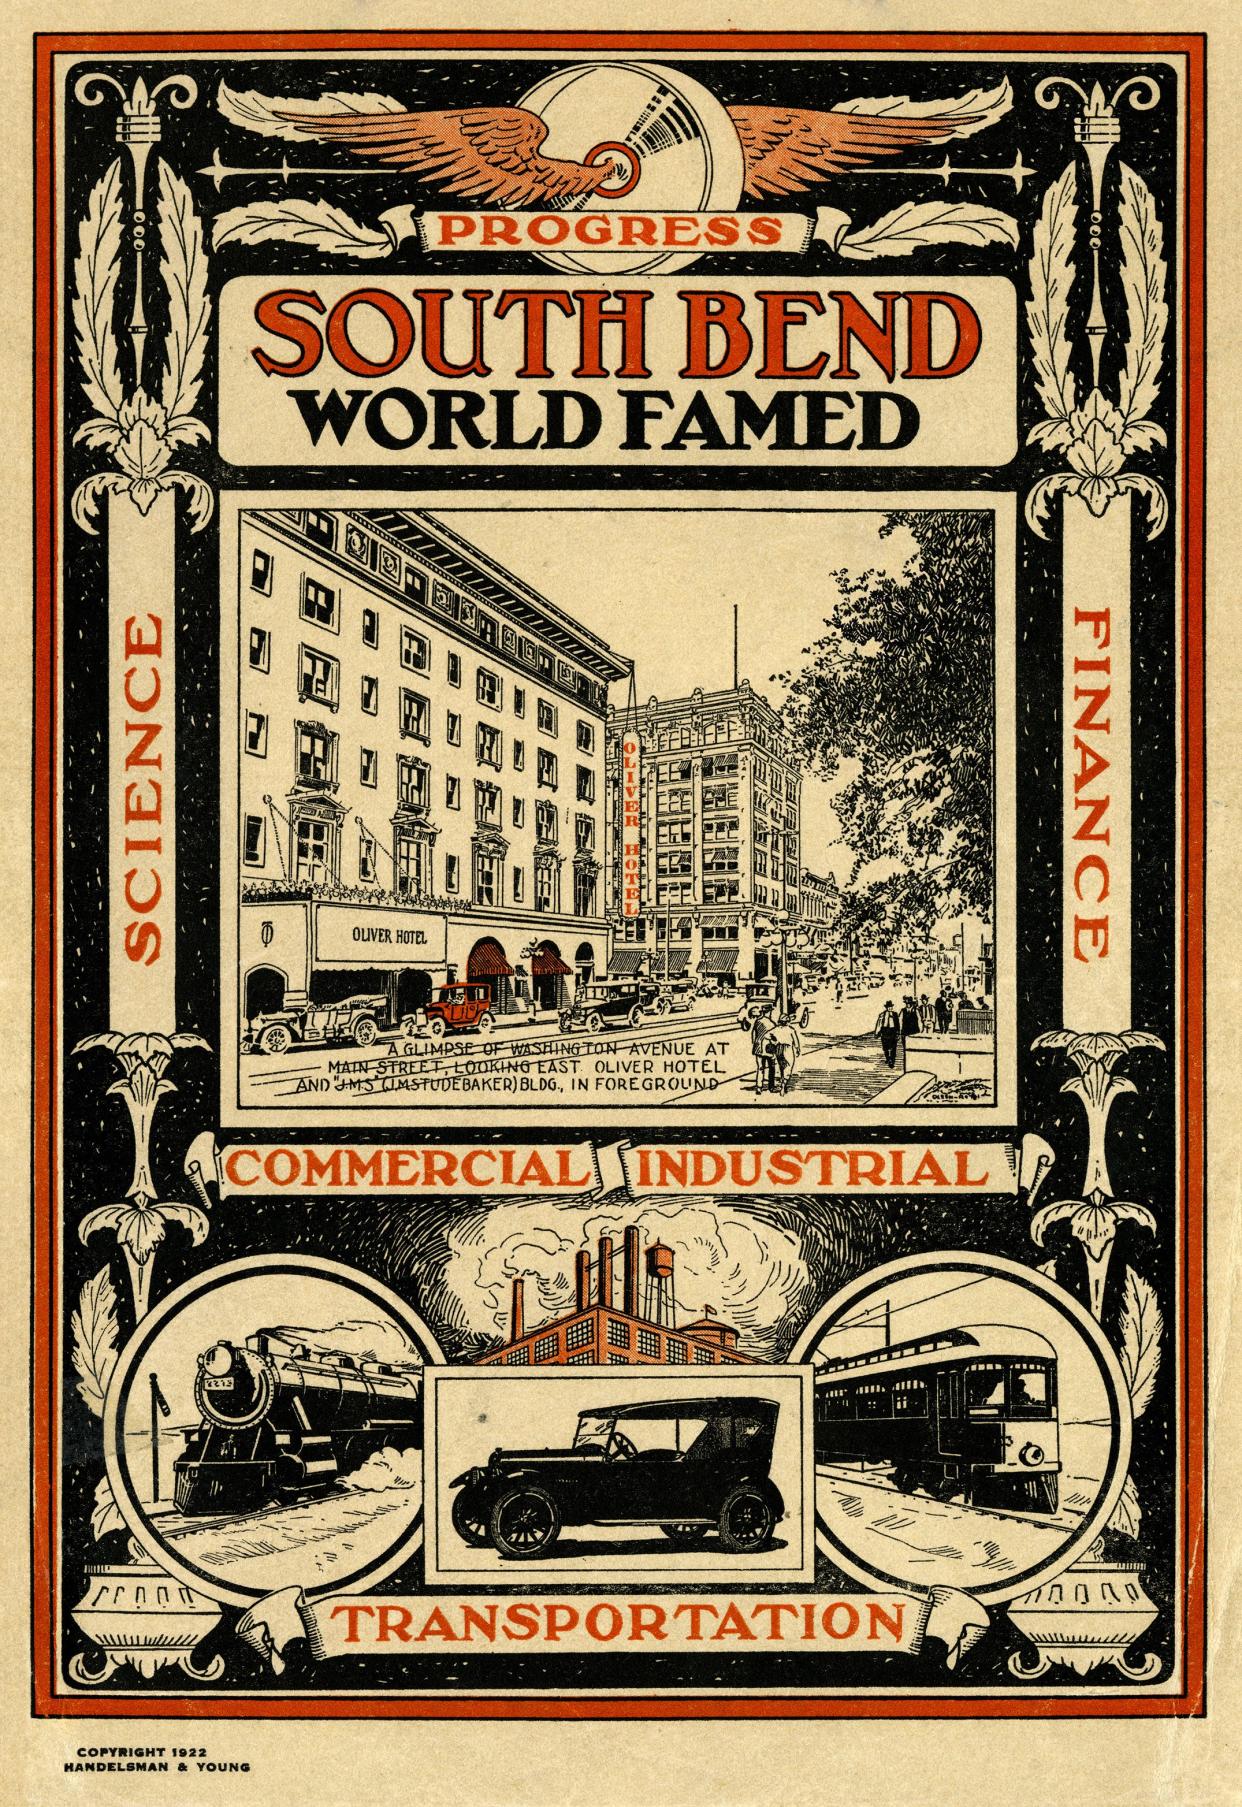 This artwork was used on the cover of a Chamber of Commerce booklet from 1922 and served as the inspiration for Tyler Foley's first-place entry in a contest to design a poster that looks ahead to the next 100 years in South Bend's history.